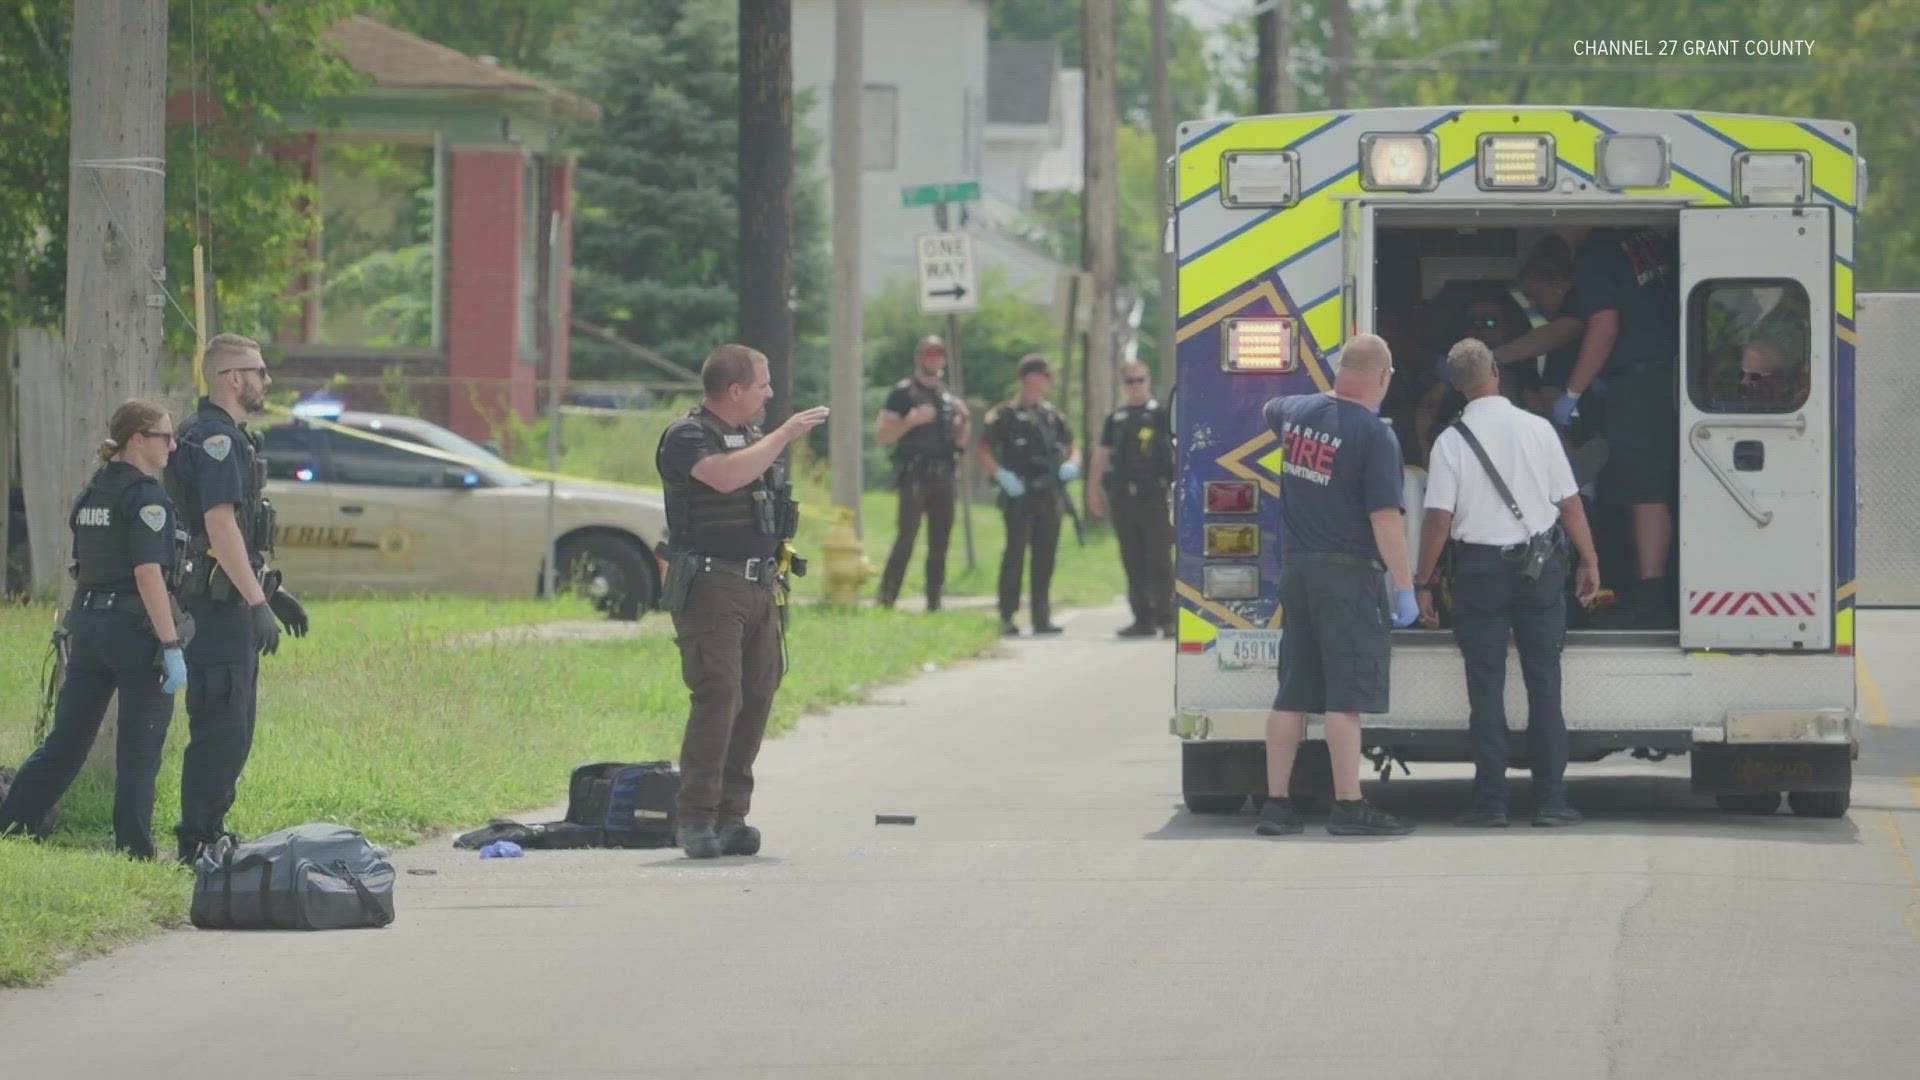 Indiana State Police confirmed to 13 news officers were wearing activated body cameras during that shooting.